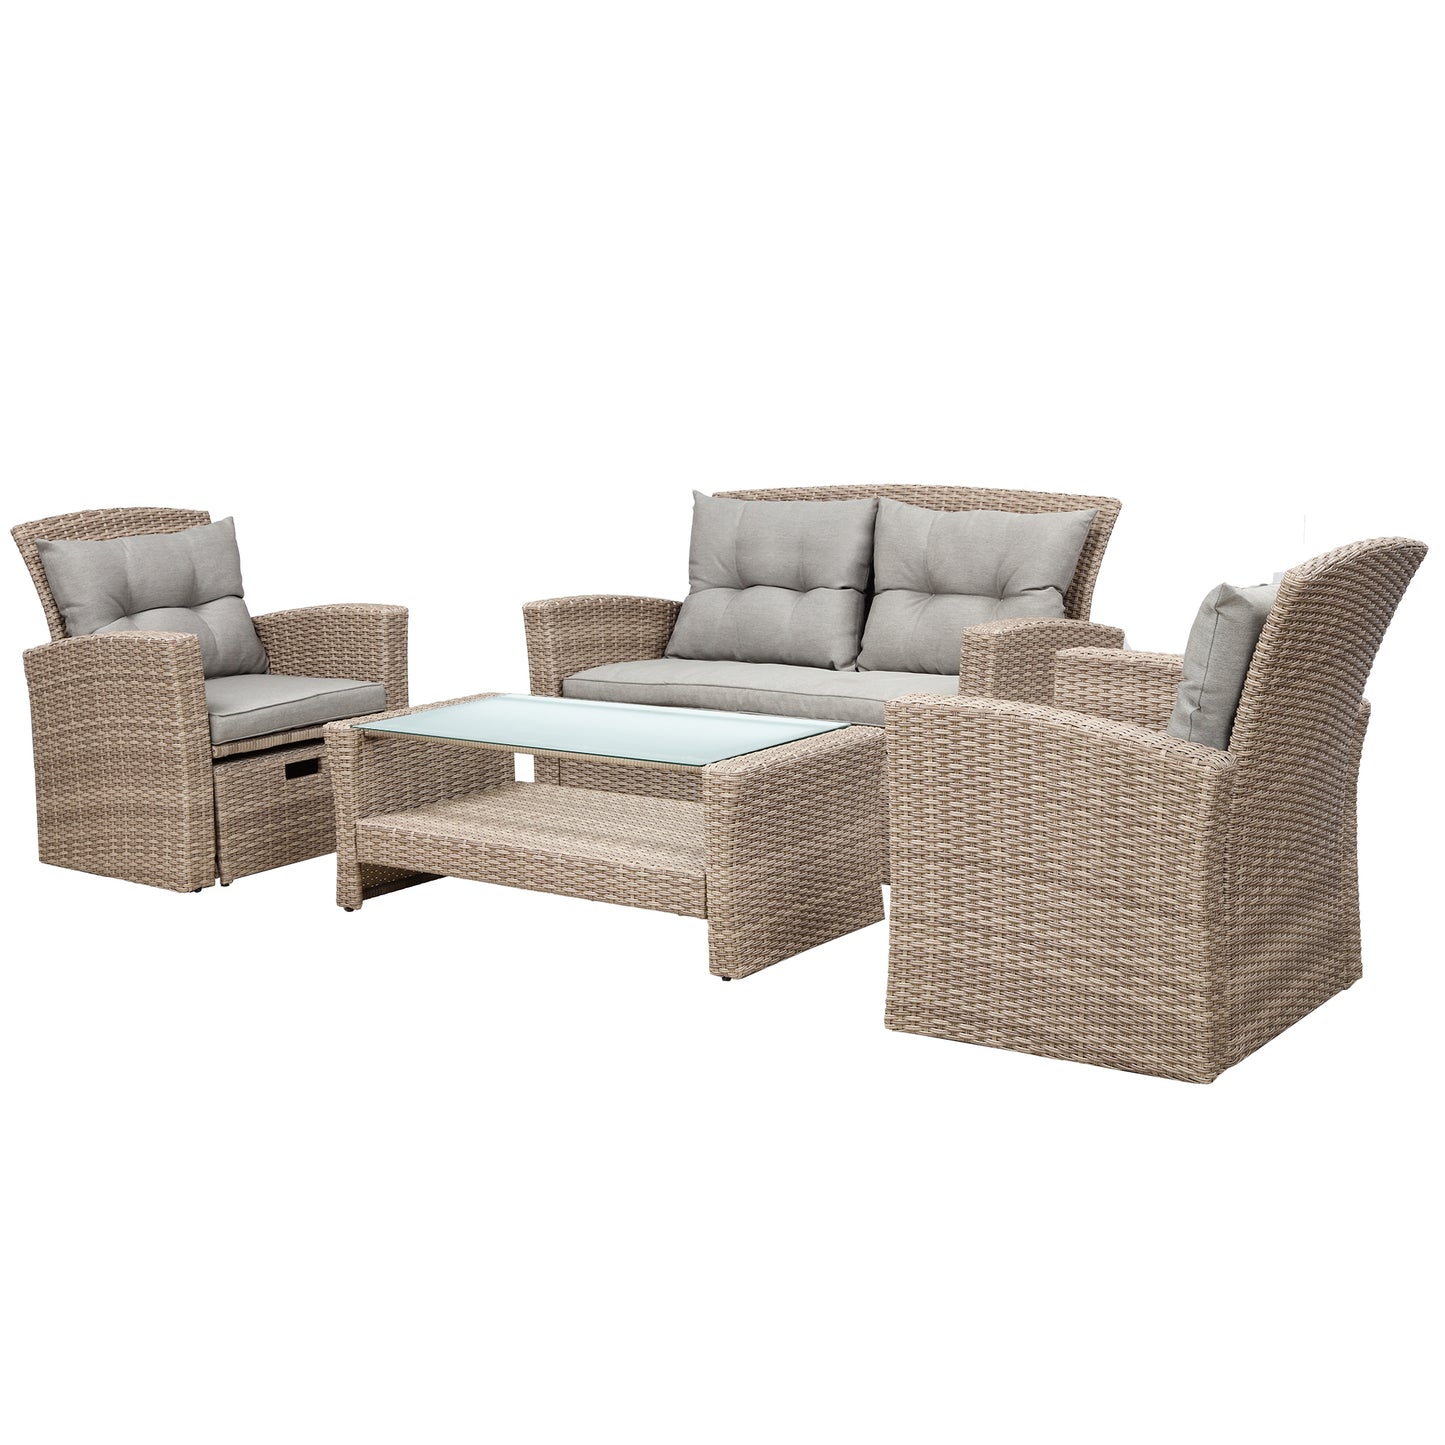 SYNGAR 4 Pieces Outdoor Patio Conversation Set, PE Rattan Wicker Furniture Set, Outdoor Patio Set Bistro Set with Loveseat Sofa, Single Chairs, Ottoman, Coffee Table for Backyard, Poolside, Gray